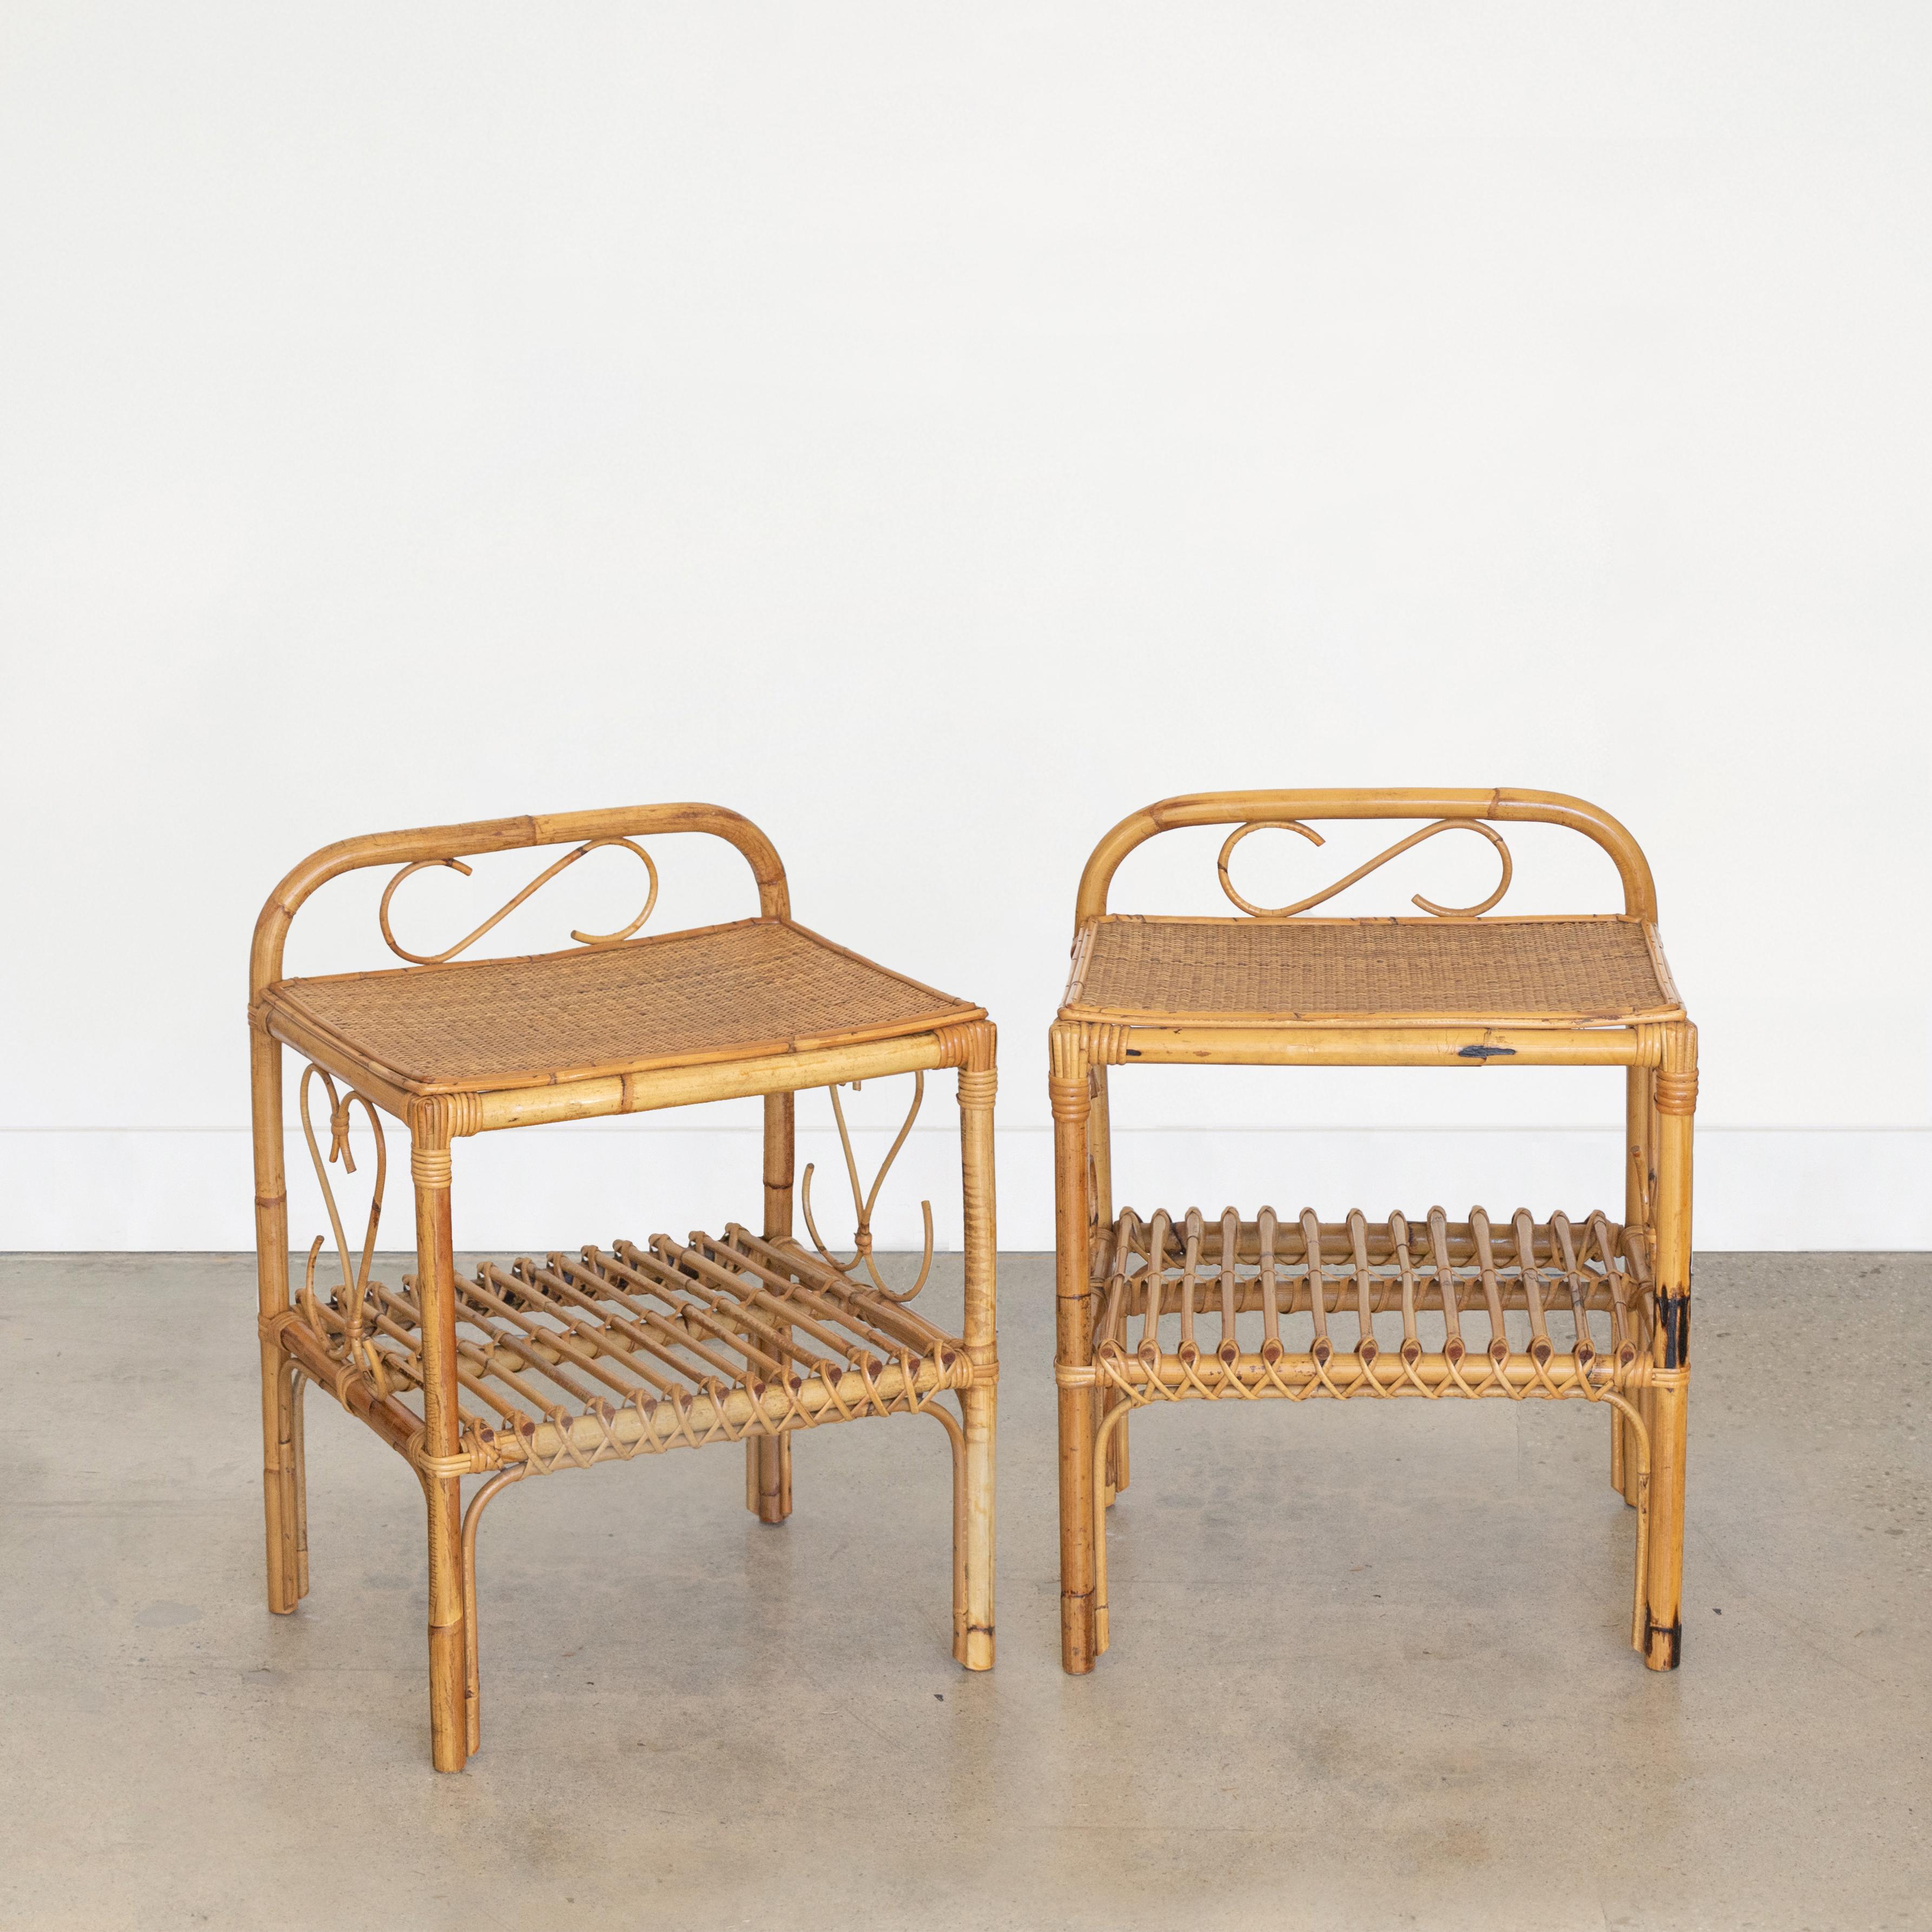 Great pair of Italian rattan bed side tables made in Italy in the 1960's. Original rattan frame with four legs, lower rattan slatted shelf, and top surface covered in woven wicker. Beautiful coiled rattan detail on the sides and back. Table height